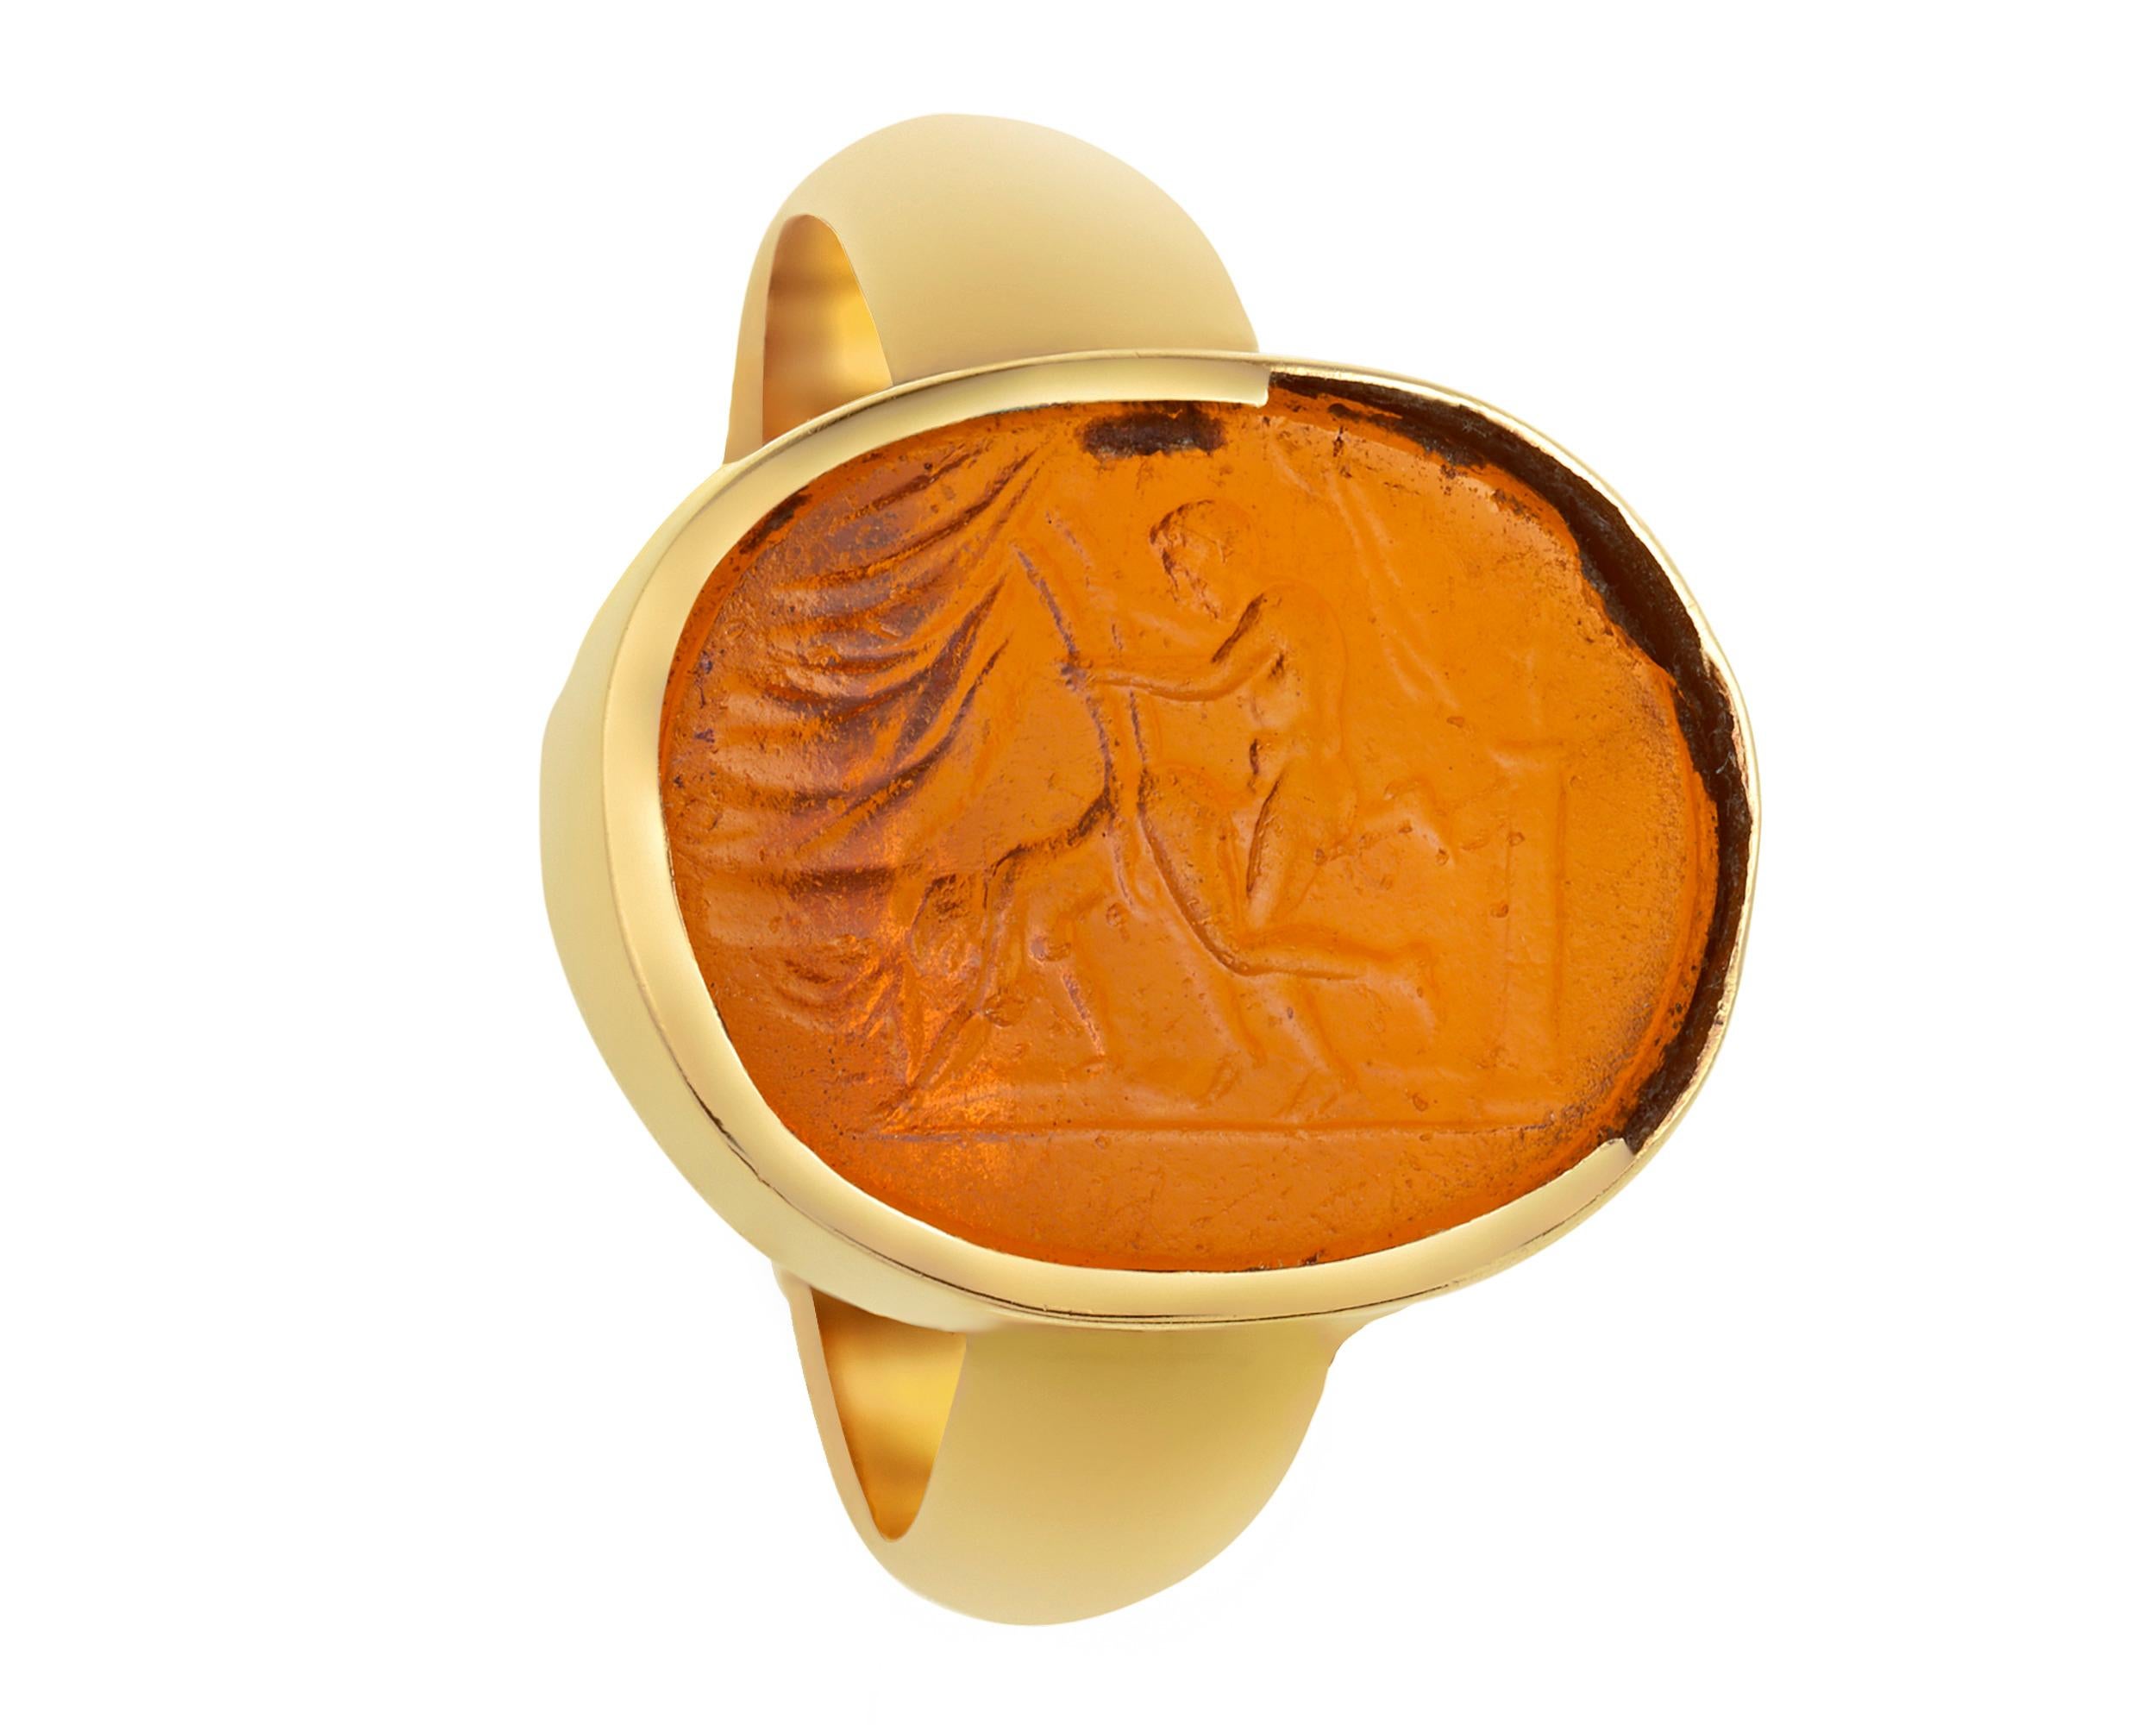 Beautifully formed and enticingly erotic, this glass ring begs closer inspection. Vibrant orange glass in a 14K yellow gold oval-shaped bezel setting provides a visually striking first impression. A closer look, however, reveals an intaglio image of